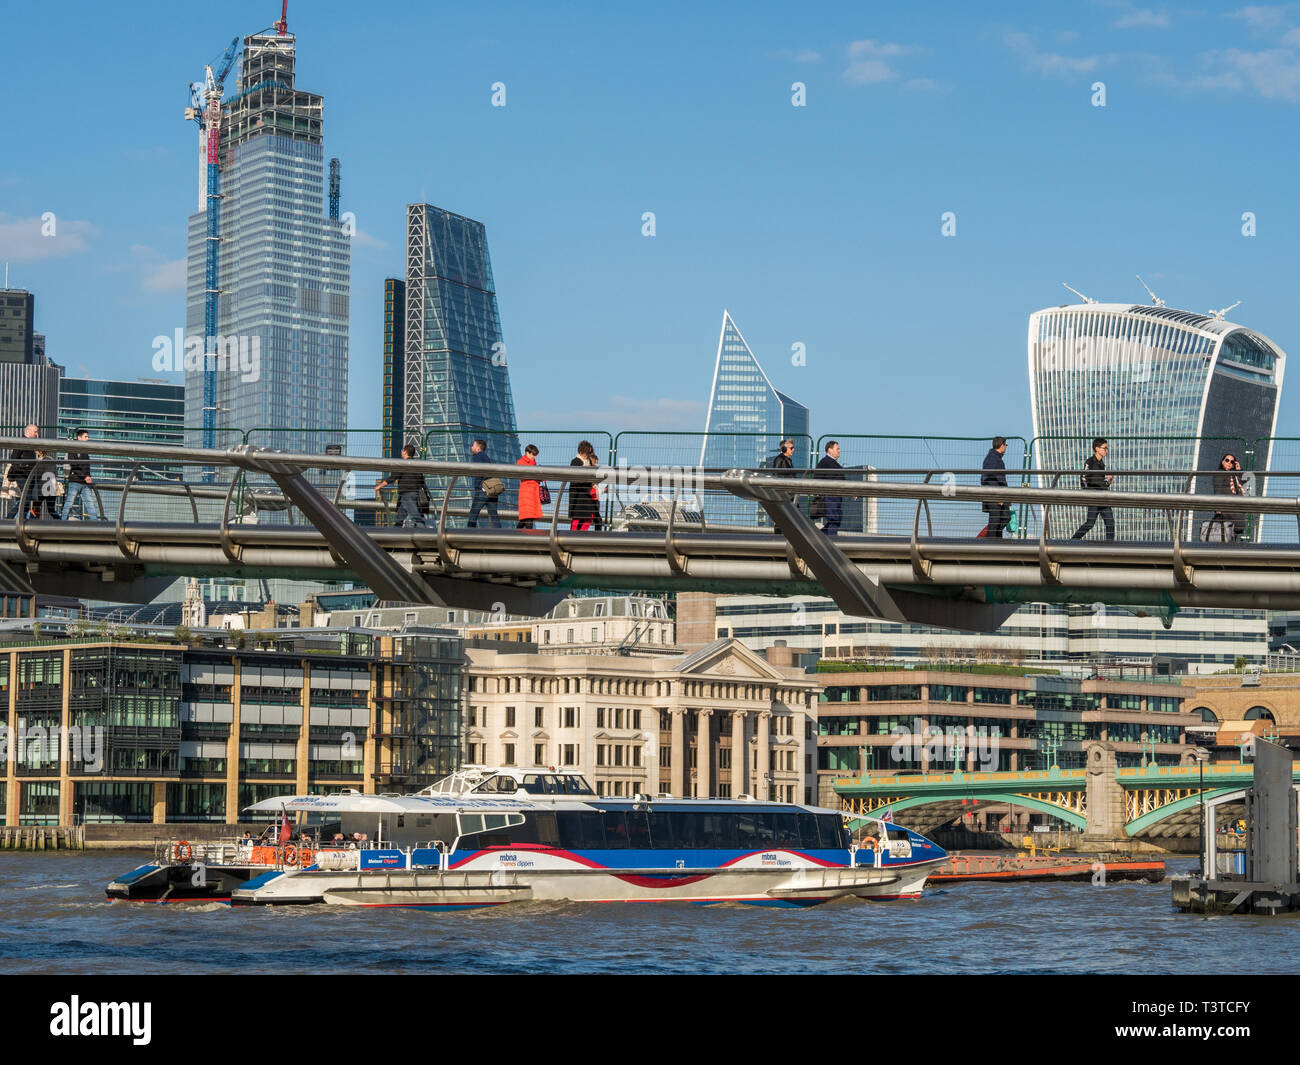 The Millennium Bridge over the River Thames with skyscrapers behind including The Walke Talkie (right), London, England Stock Photo